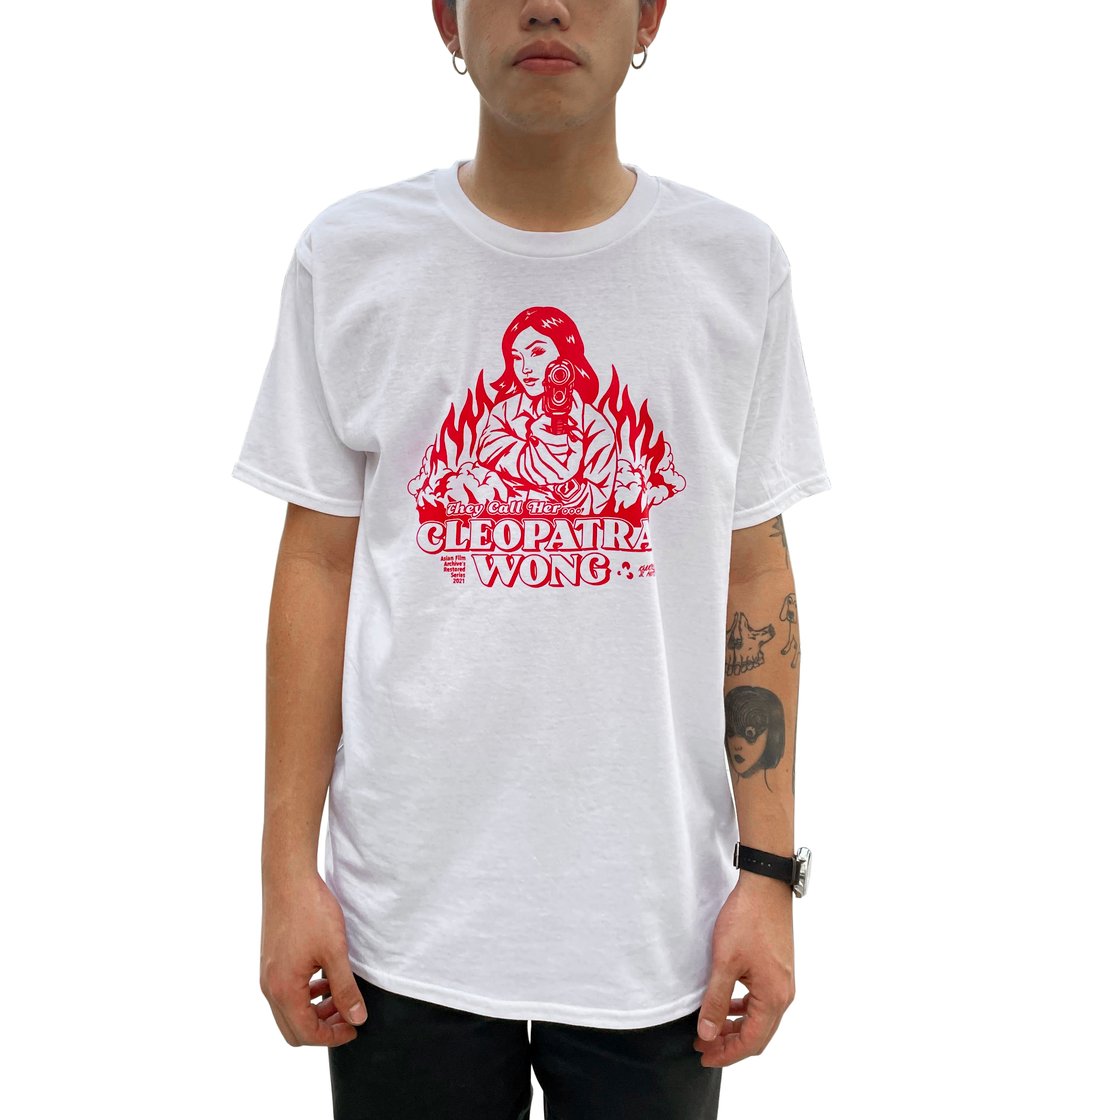 Image of They Call Her...Cleopatra Wong (1978) Silkscreened T-Shirt by K&N for Asian Film Archive